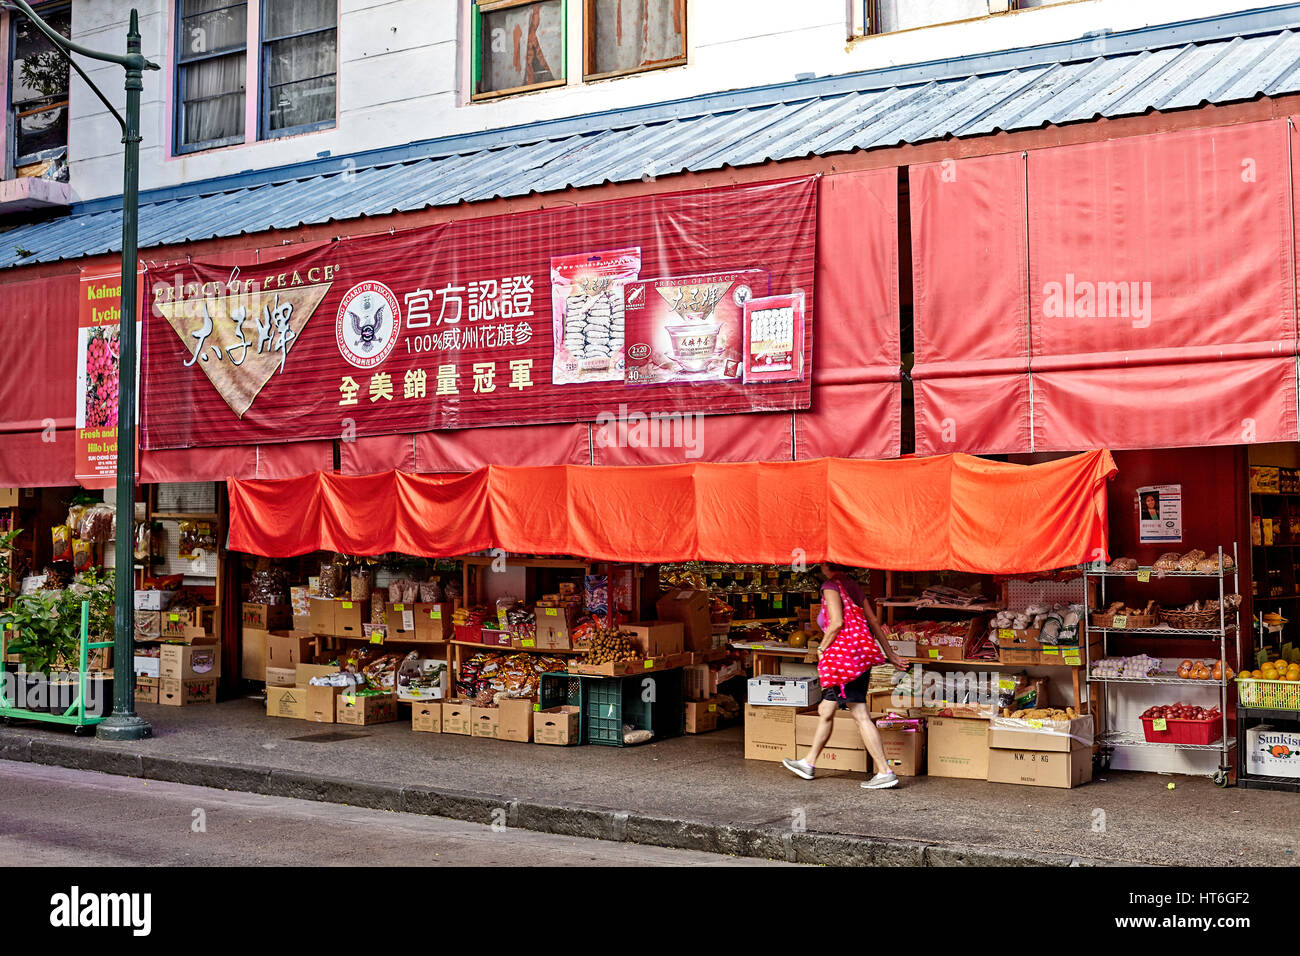 Honolulu, Hawaii, USA - August 6, 2016: The Chinatown Historic District is a popular local destination and tourist attraction in Hawaii and dates back Stock Photo